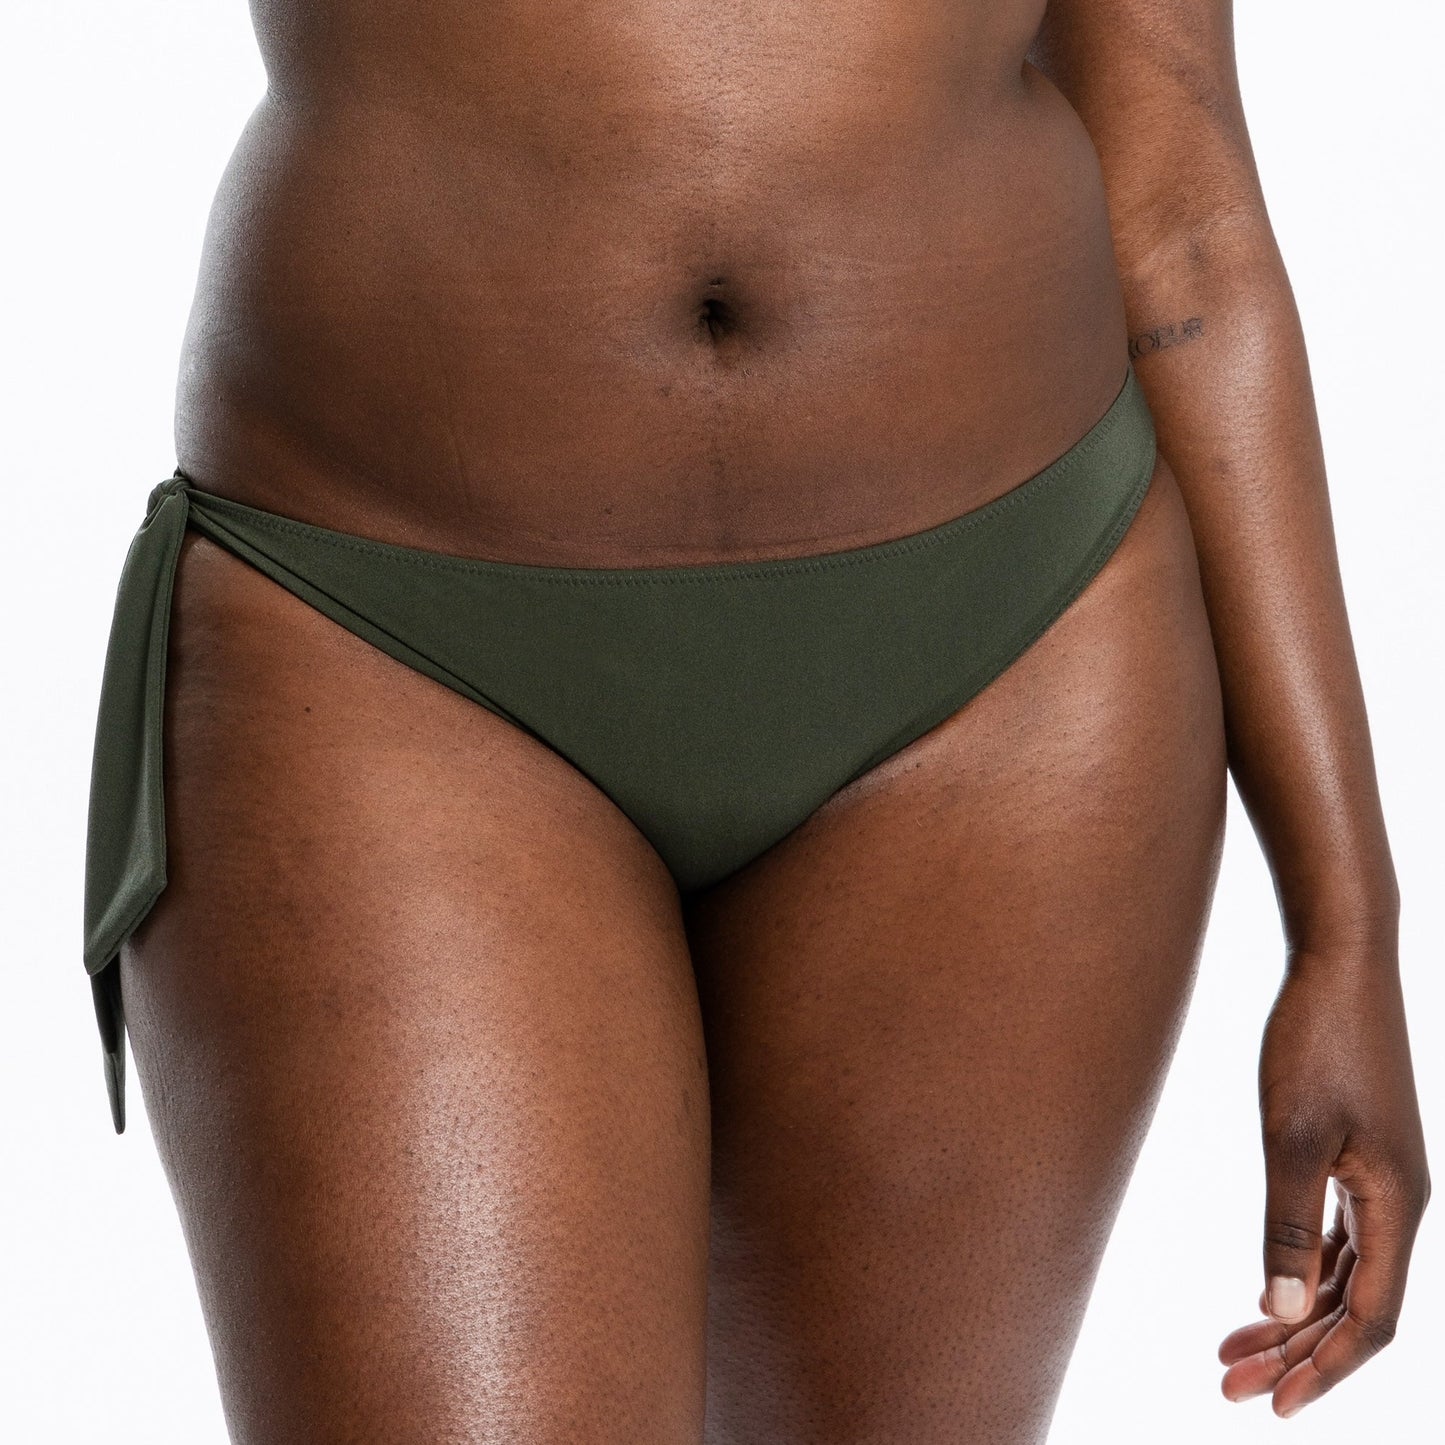 Picture Me Better Bikini Bottoms are part of a post-unilateral mastectomy bikini that perfectly fits people with one breast. By Eno.Eco | Offering stylish, sustainable alternatives after a single mastectomy | The Bra Sisters